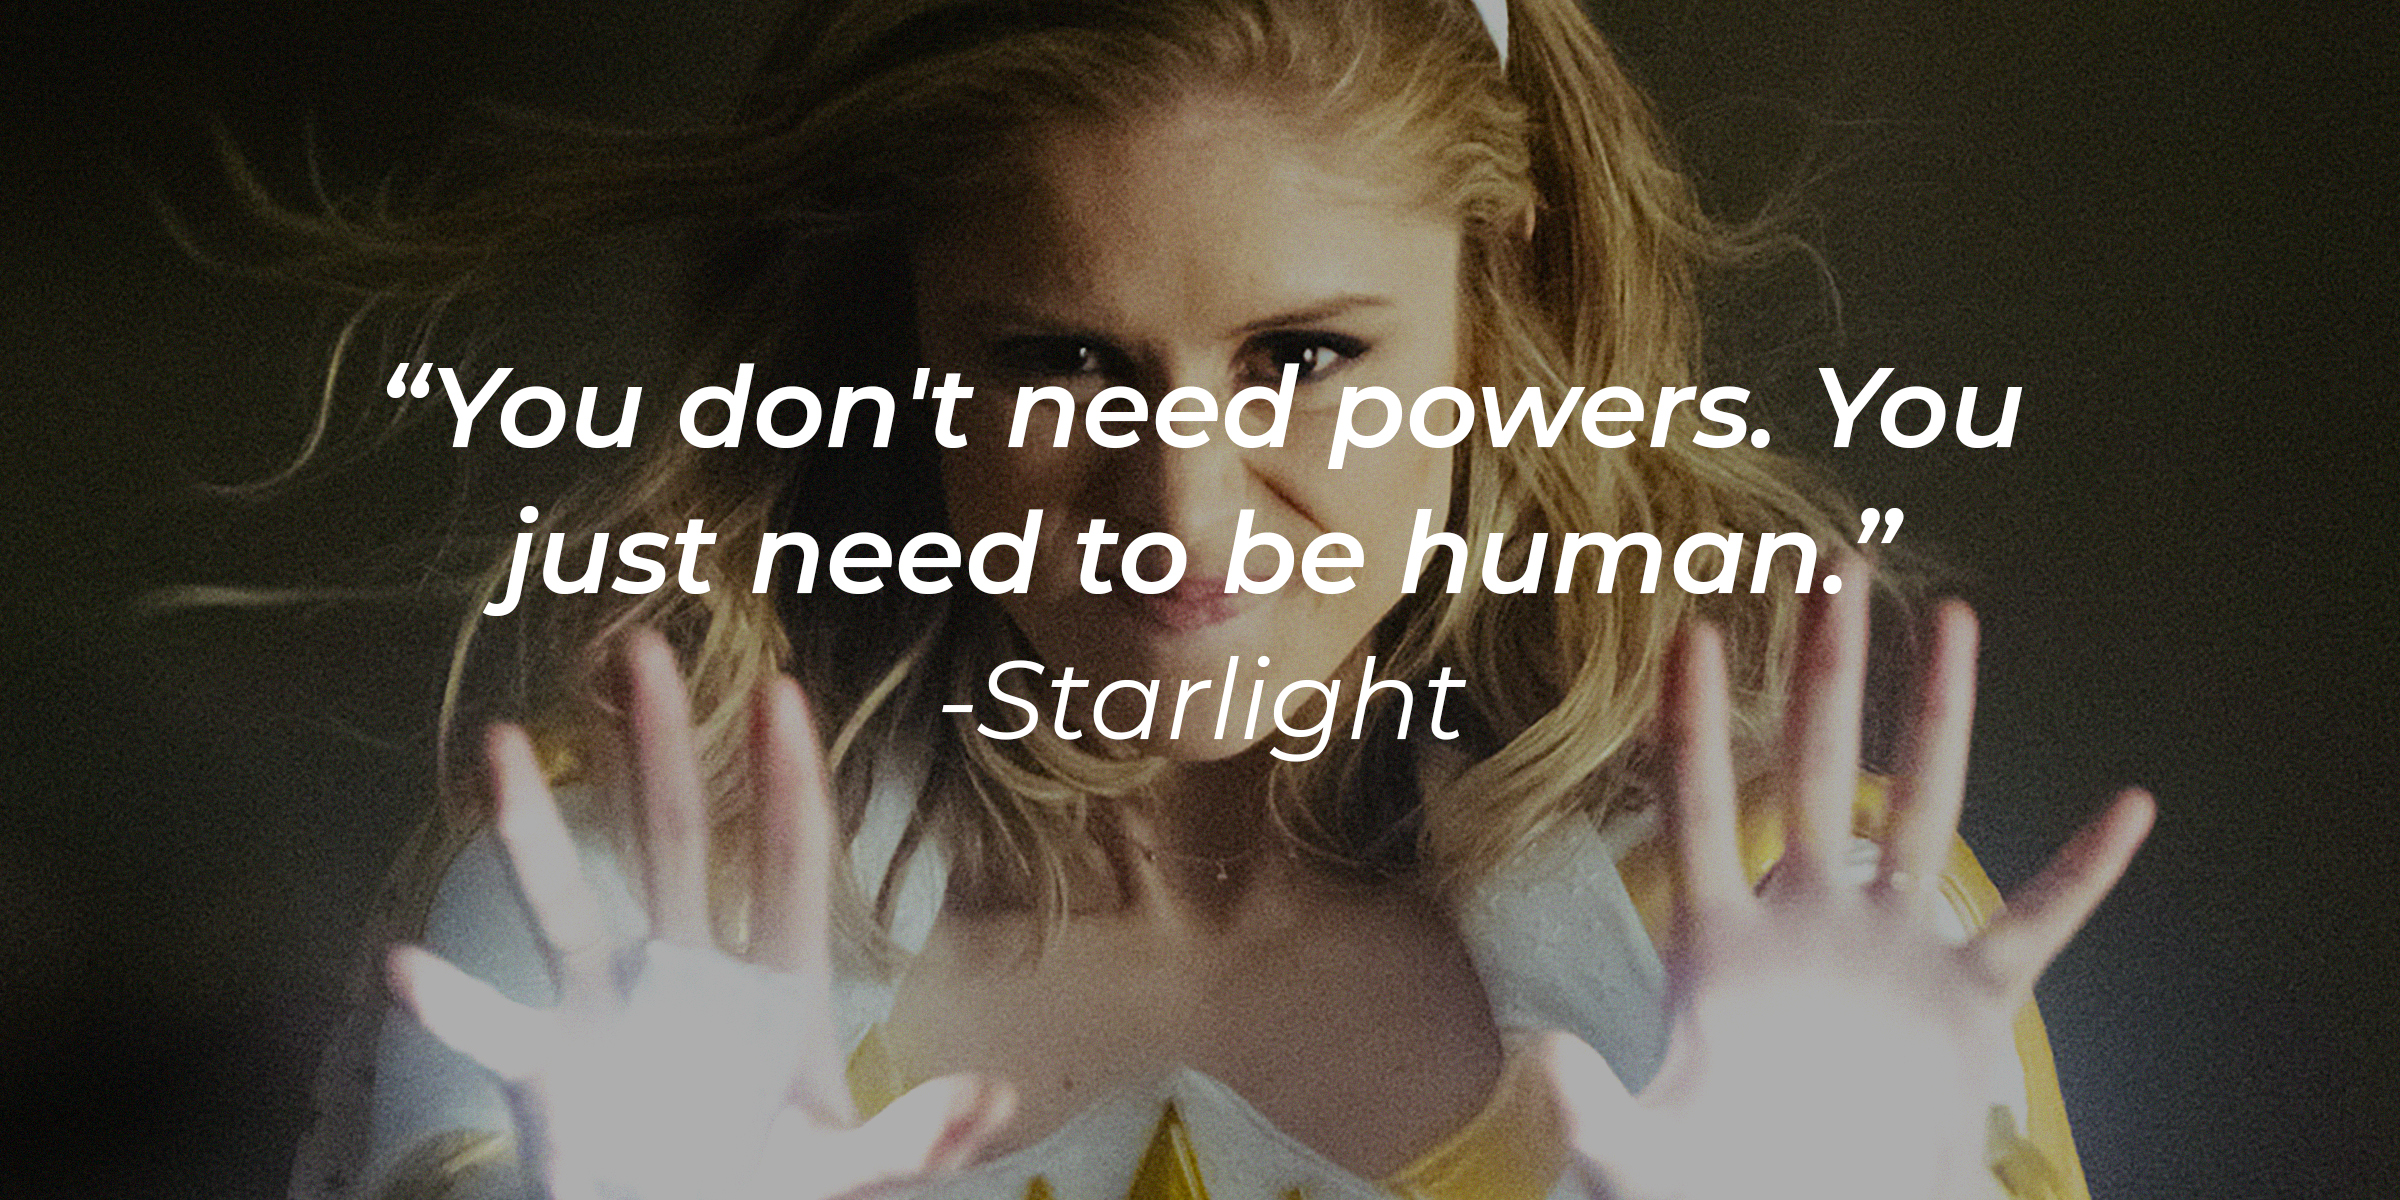 Starlight, with her quote: "You don't need powers. You just need to be human." | Source: facebook.com/TheBoysTV